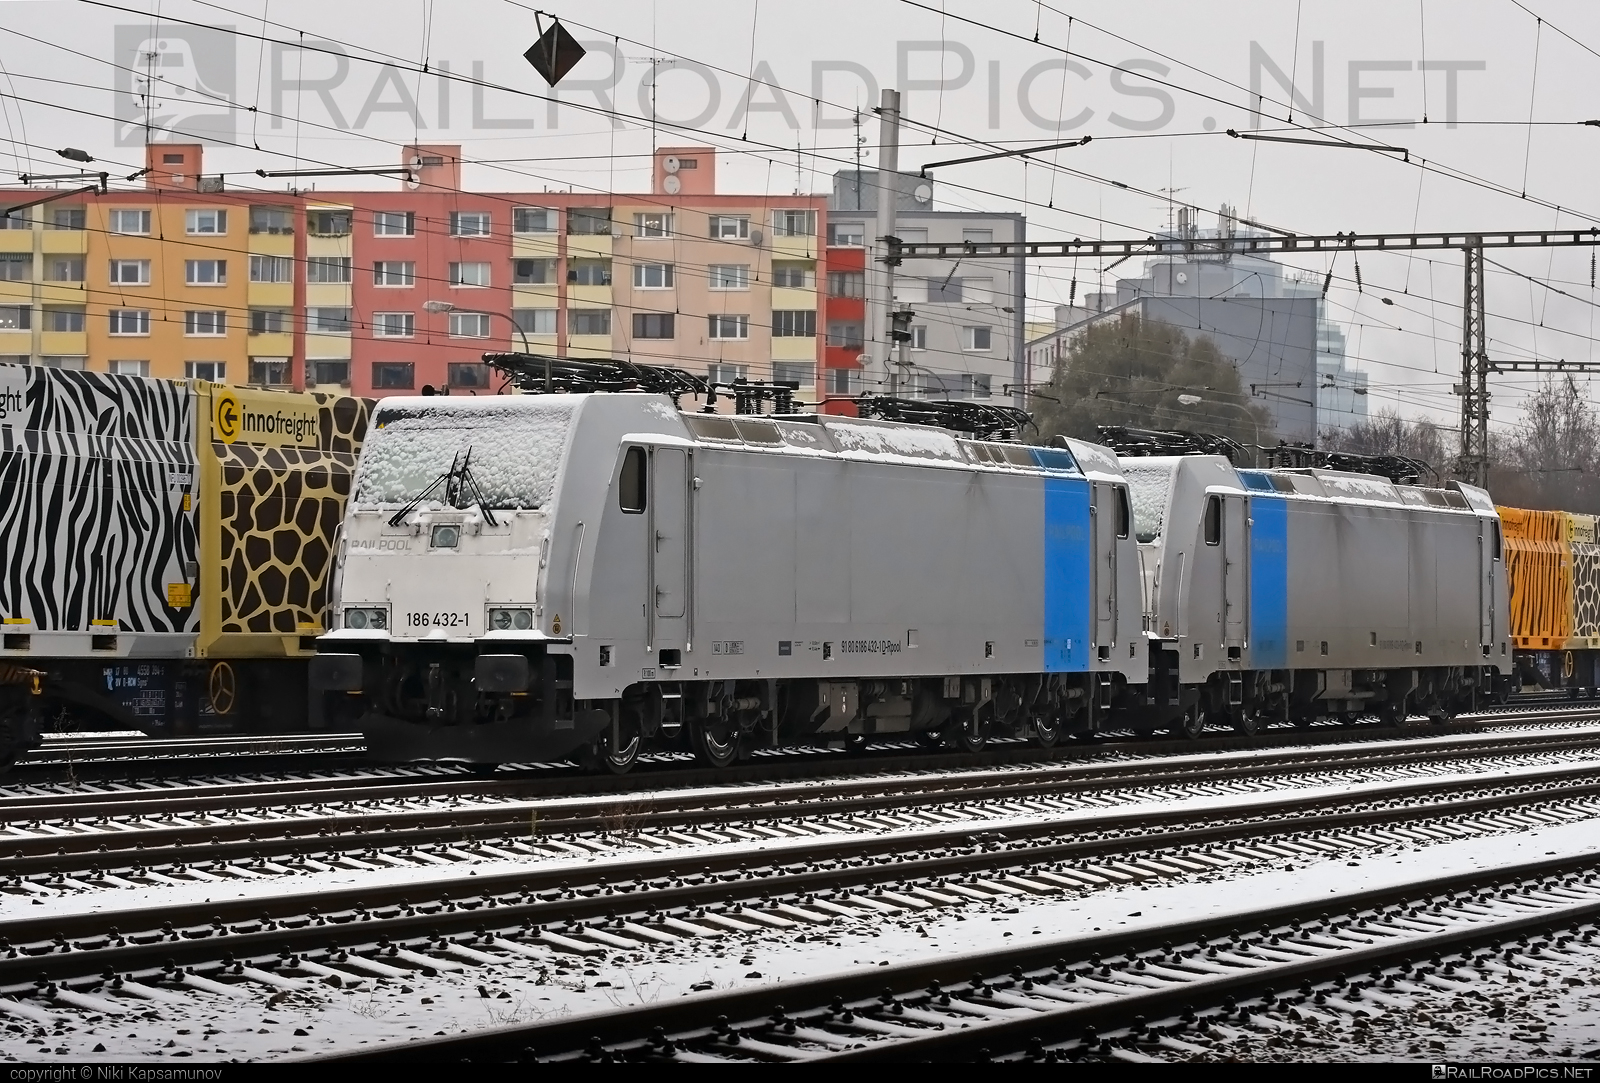 Bombardier TRAXX F140 MS - 186 432-1 operated by METRANS Rail s.r.o. #bombardier #bombardiertraxx #hhla #metrans #metransrail #railpool #railpoolgmbh #traxx #traxxf140 #traxxf140ms